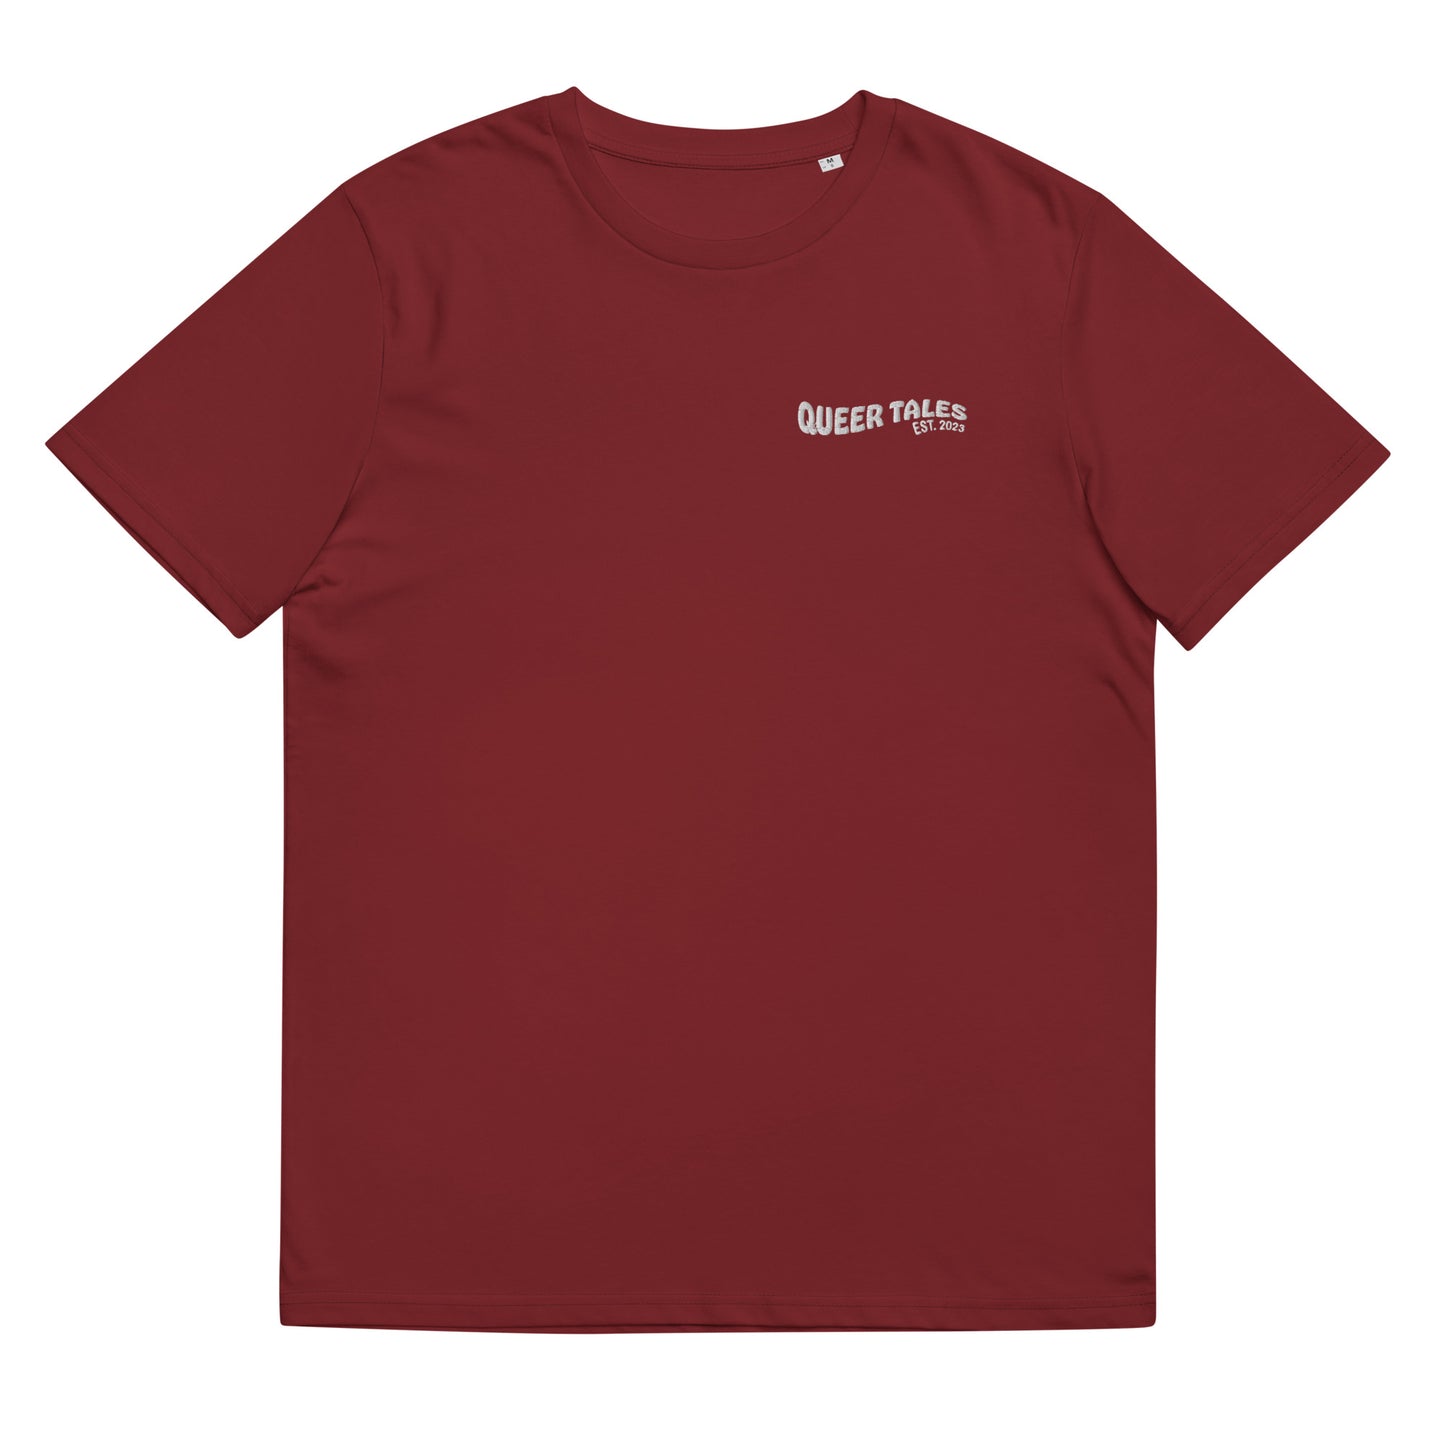 Fitted burgundy red organic cotton t-shirt with embroidered queer tales on the left chest. Available in sizes S to 2XL.